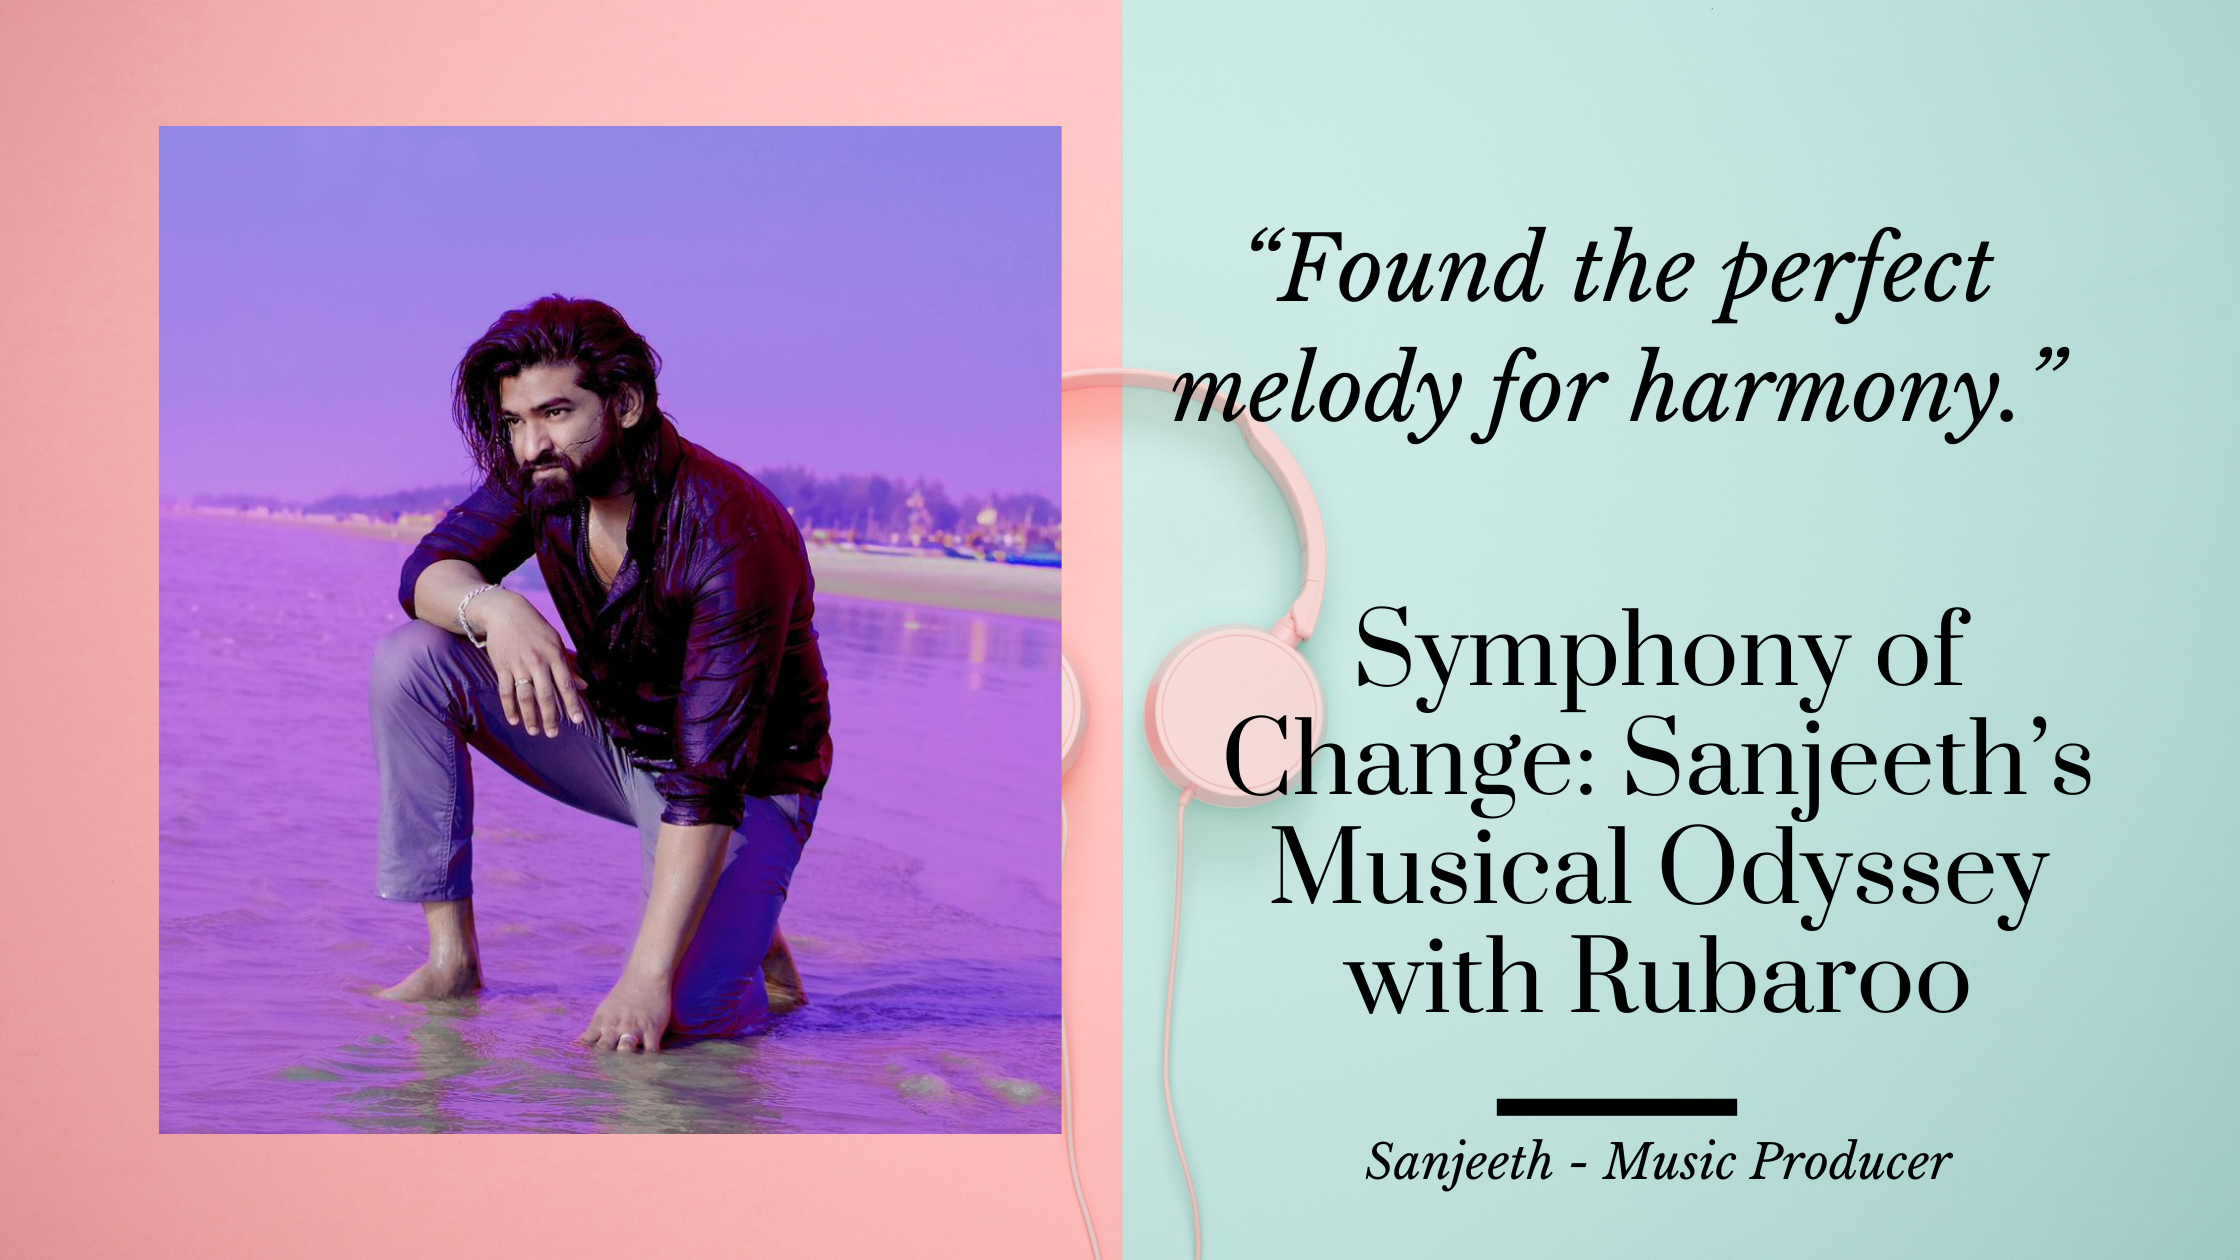 Symphony of Change: Sanjeeth’s Musical Odyssey with Rubaroo